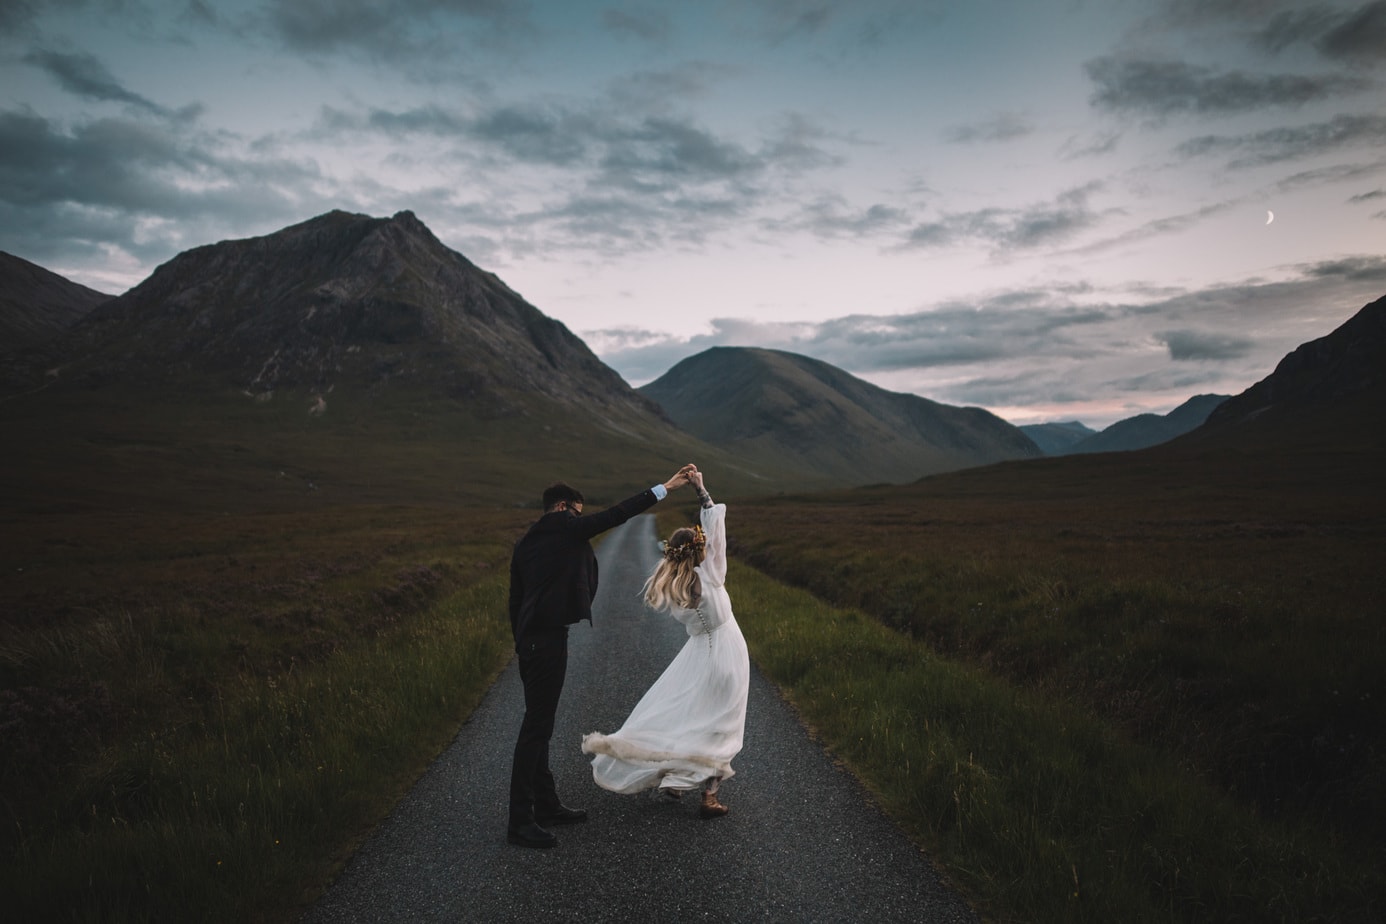 Set on the road to Glen Etive, A bride is twirling around her groom at blue hour and a little moon can be seen between the hills.